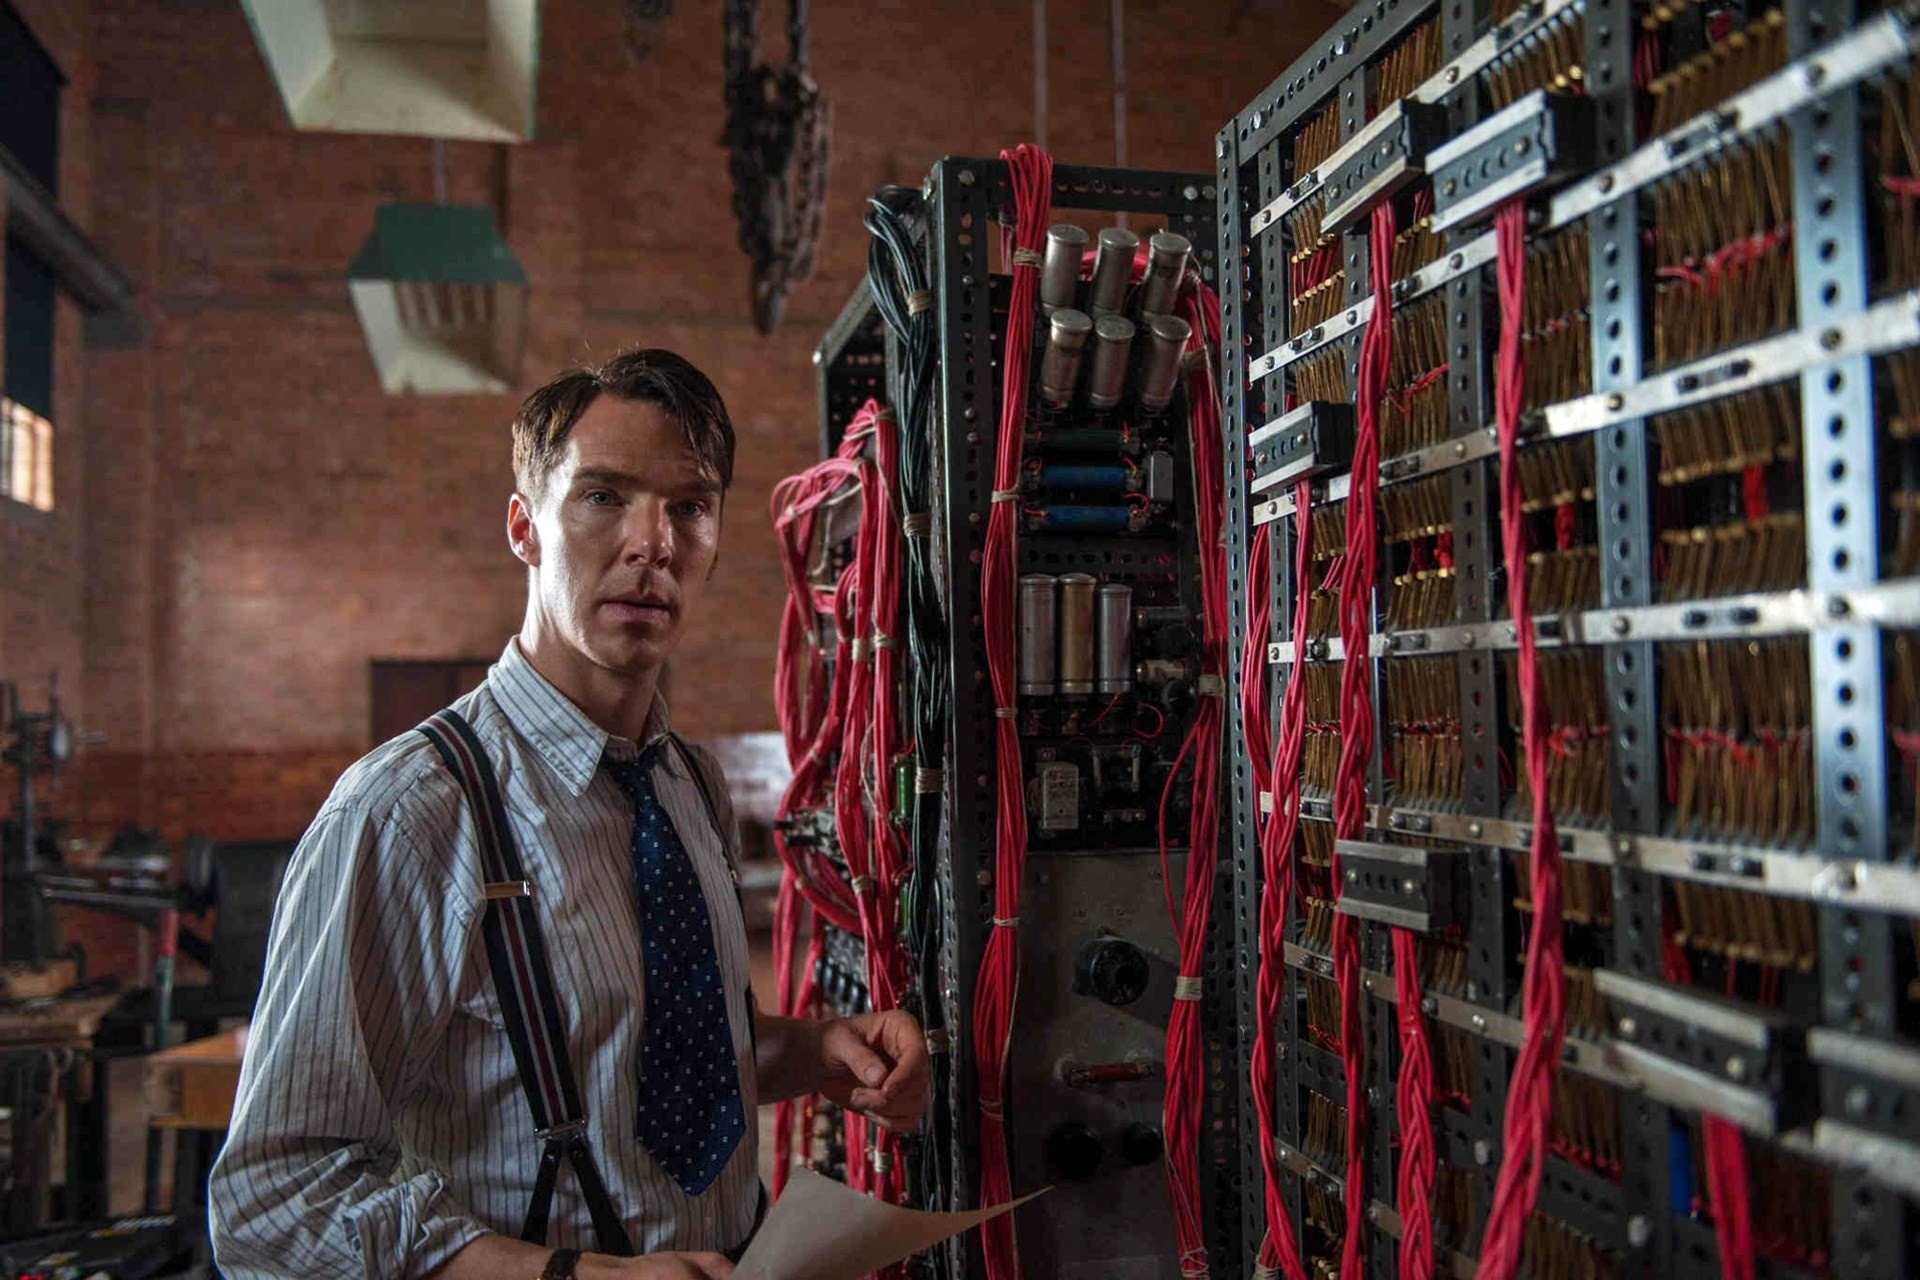 The Imitation Game: Benedict Cumberbatch as Turing, who decrypted German intelligence messages for the British government during World War II. 1920x1280 HD Wallpaper.